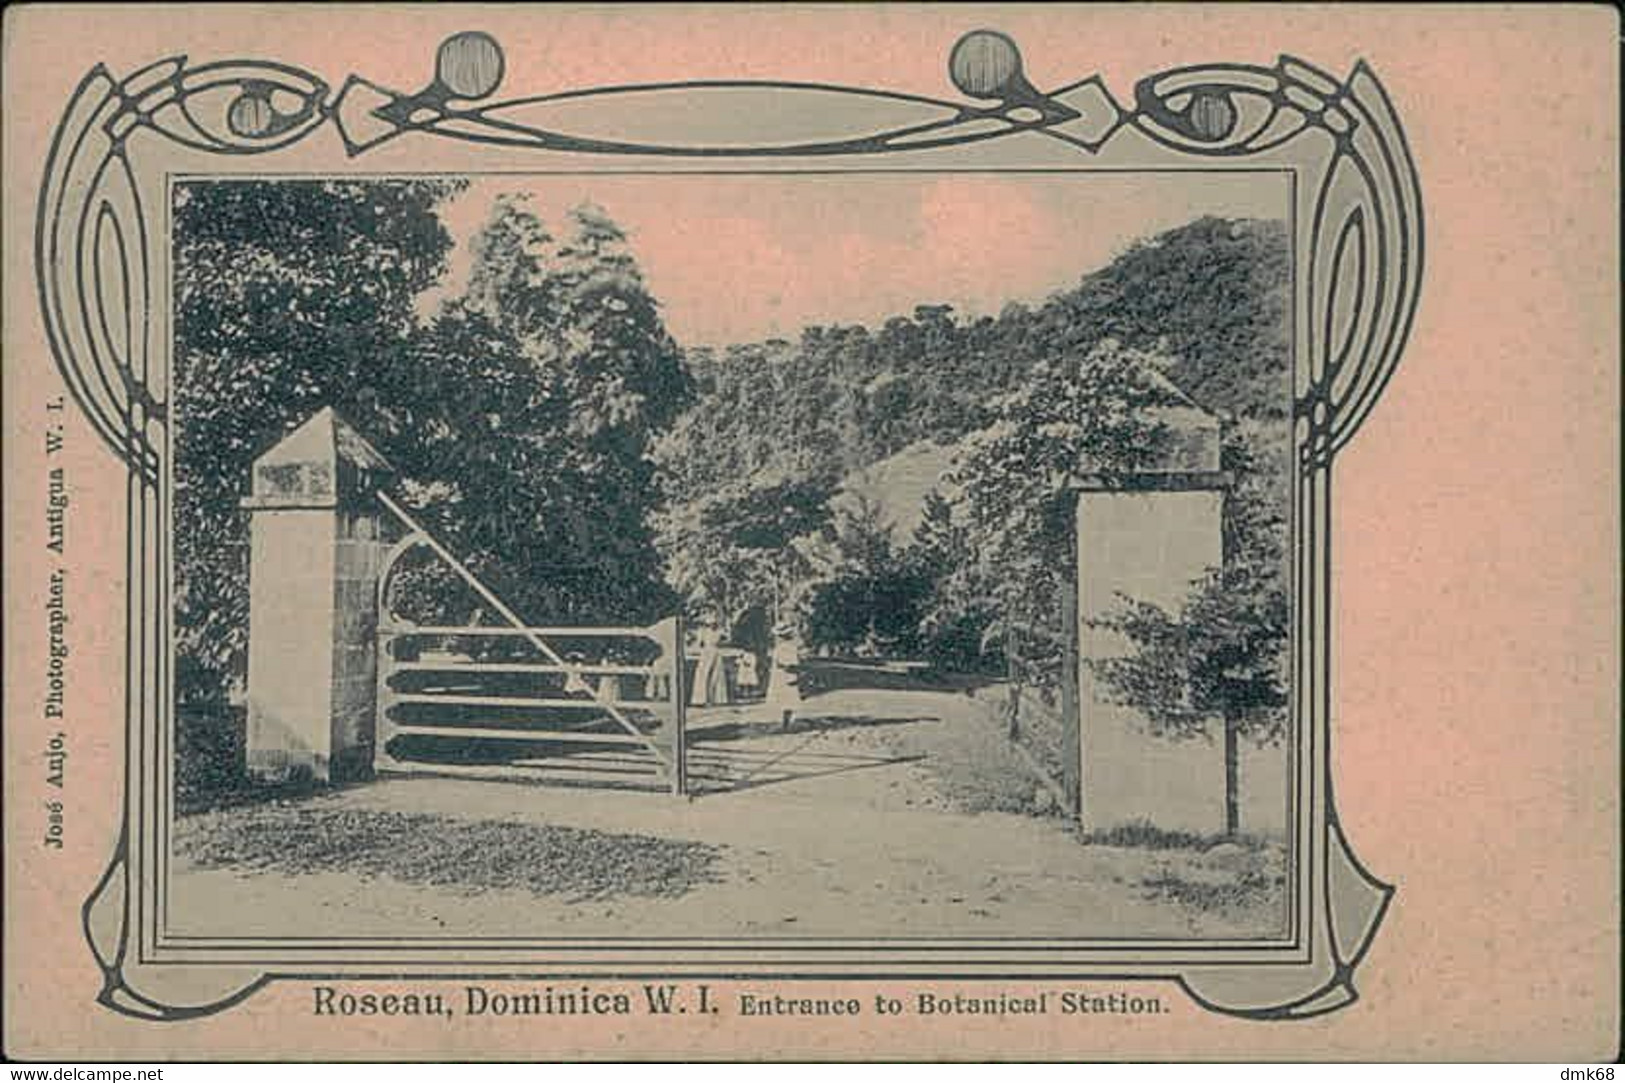 DOMINCA -  WEST INDIES - ROSEAU - ENTRANCE TO BOTANICAL STATION - PHOTO JOSE ANJO - 1900s (15741) - Dominica